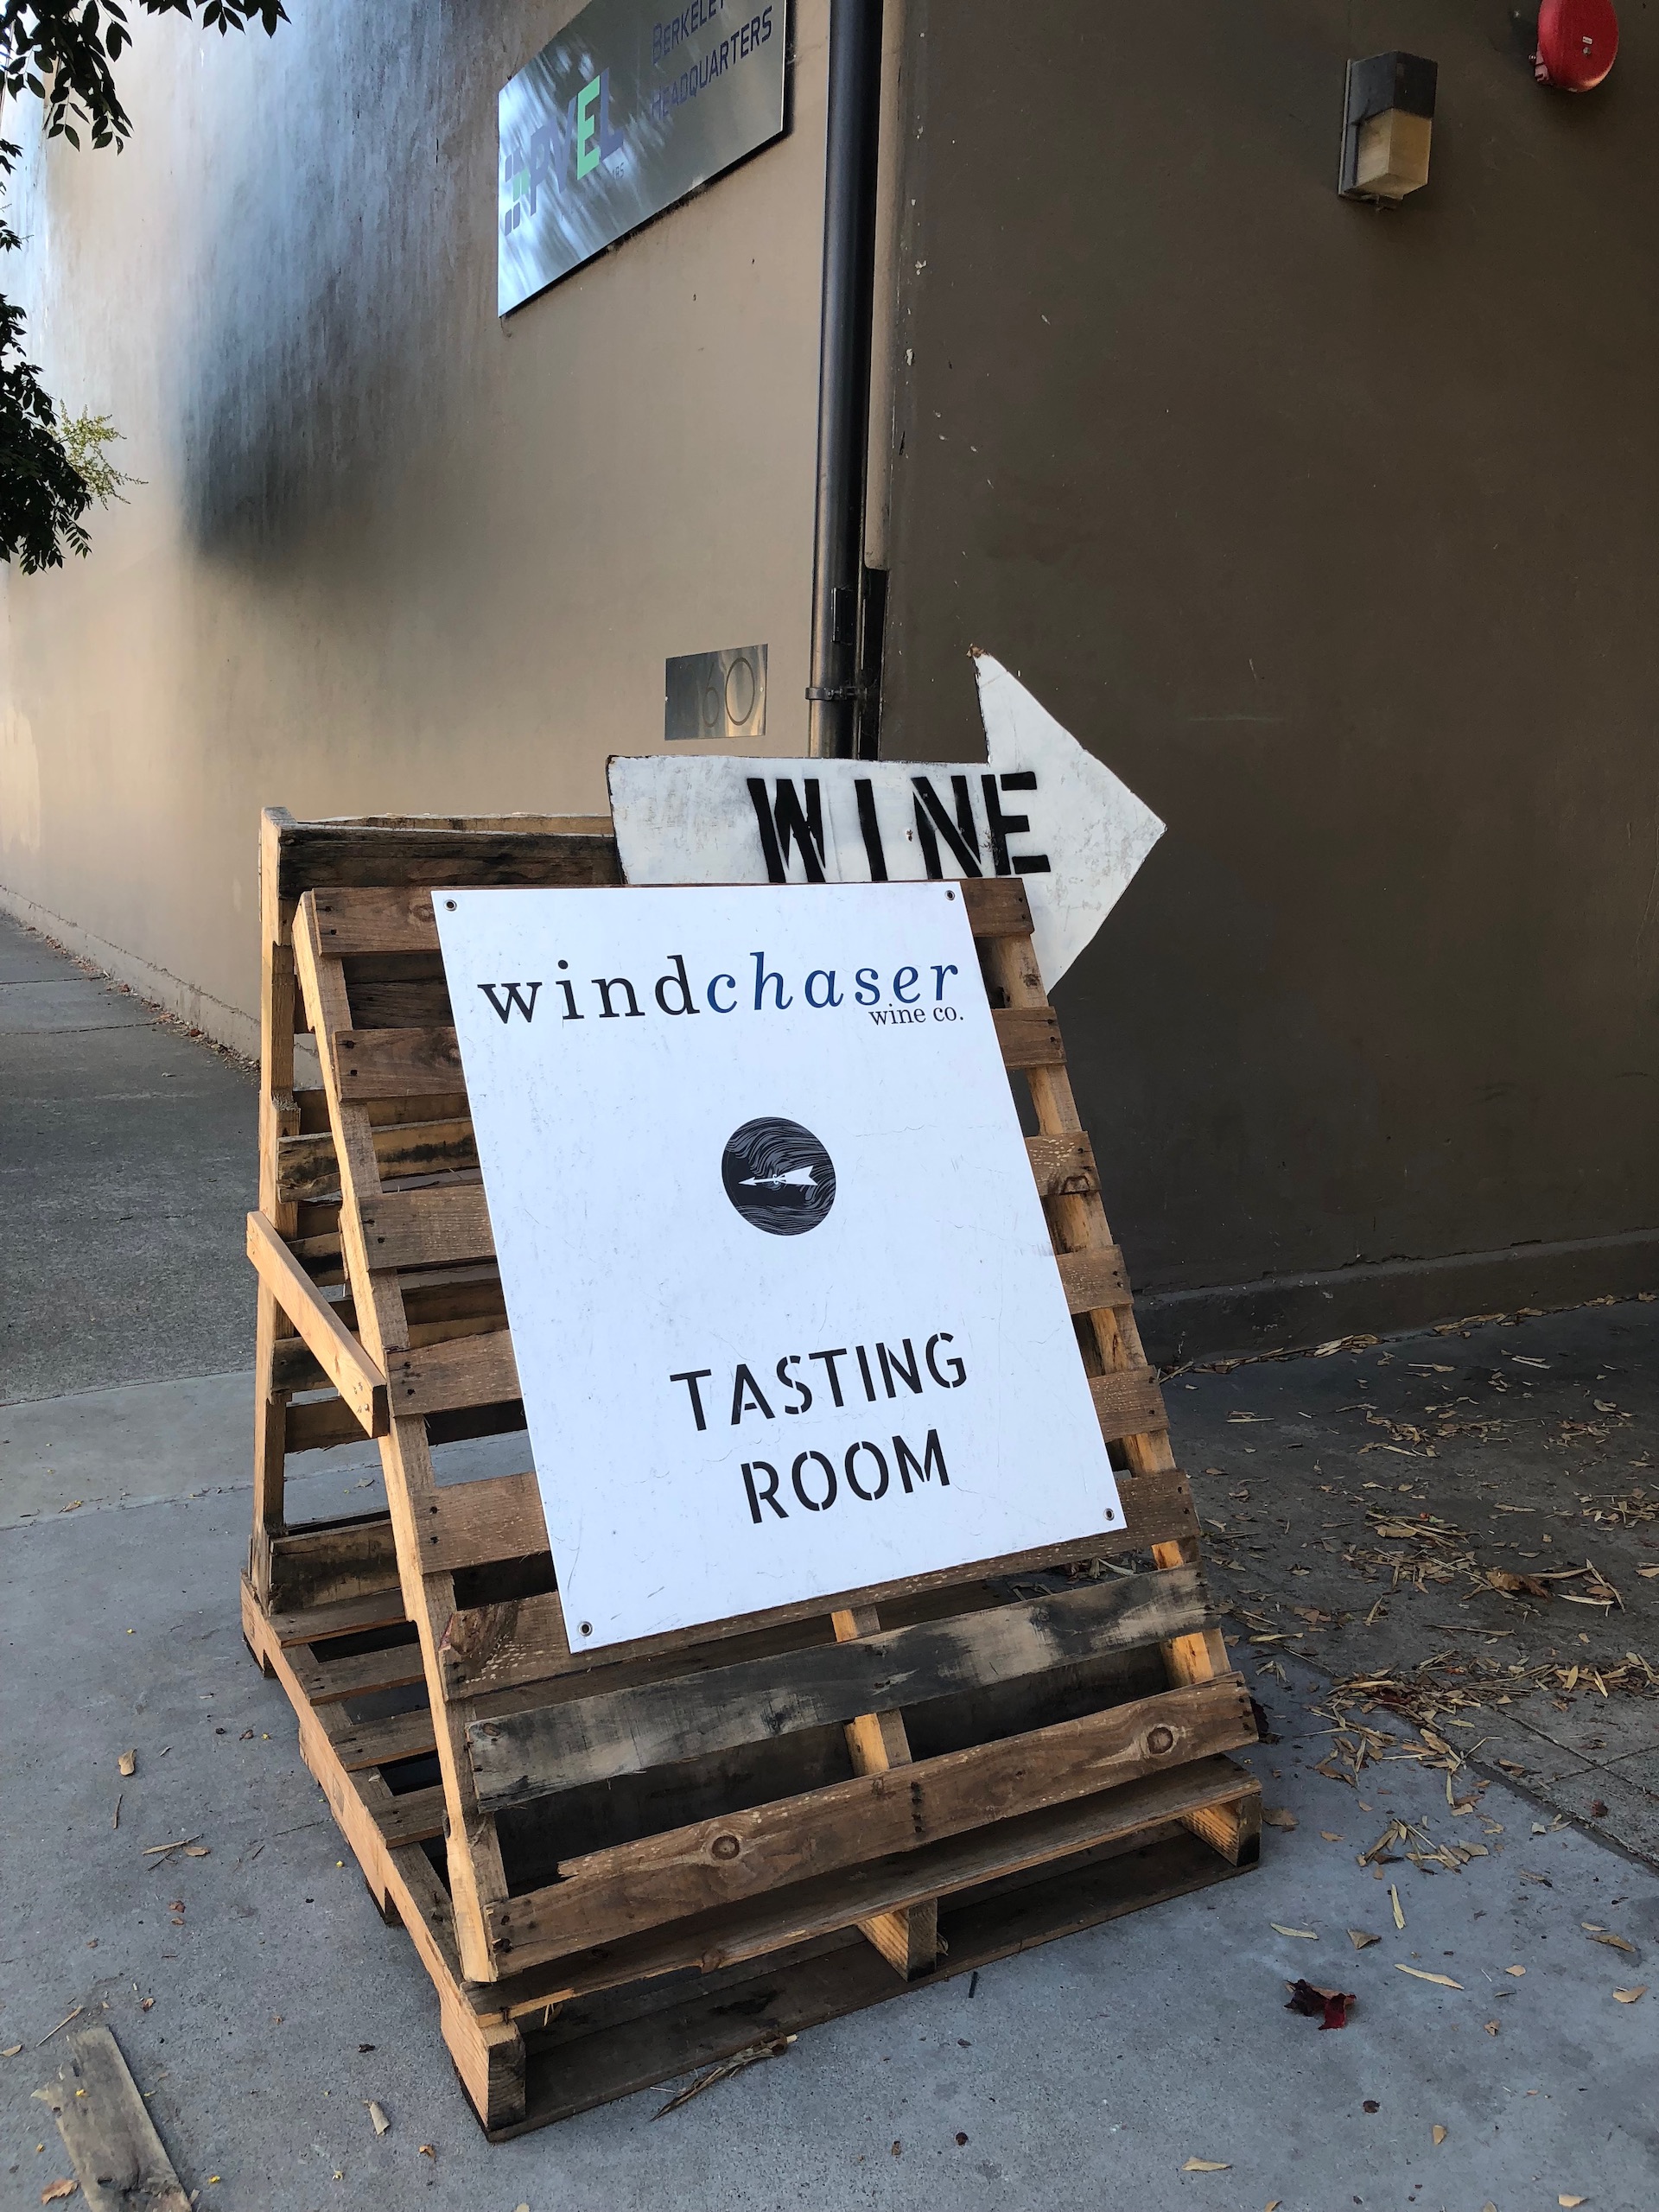 The wind blows wine tasters to some of the best urban winery wines at Windchaser in Berkeley